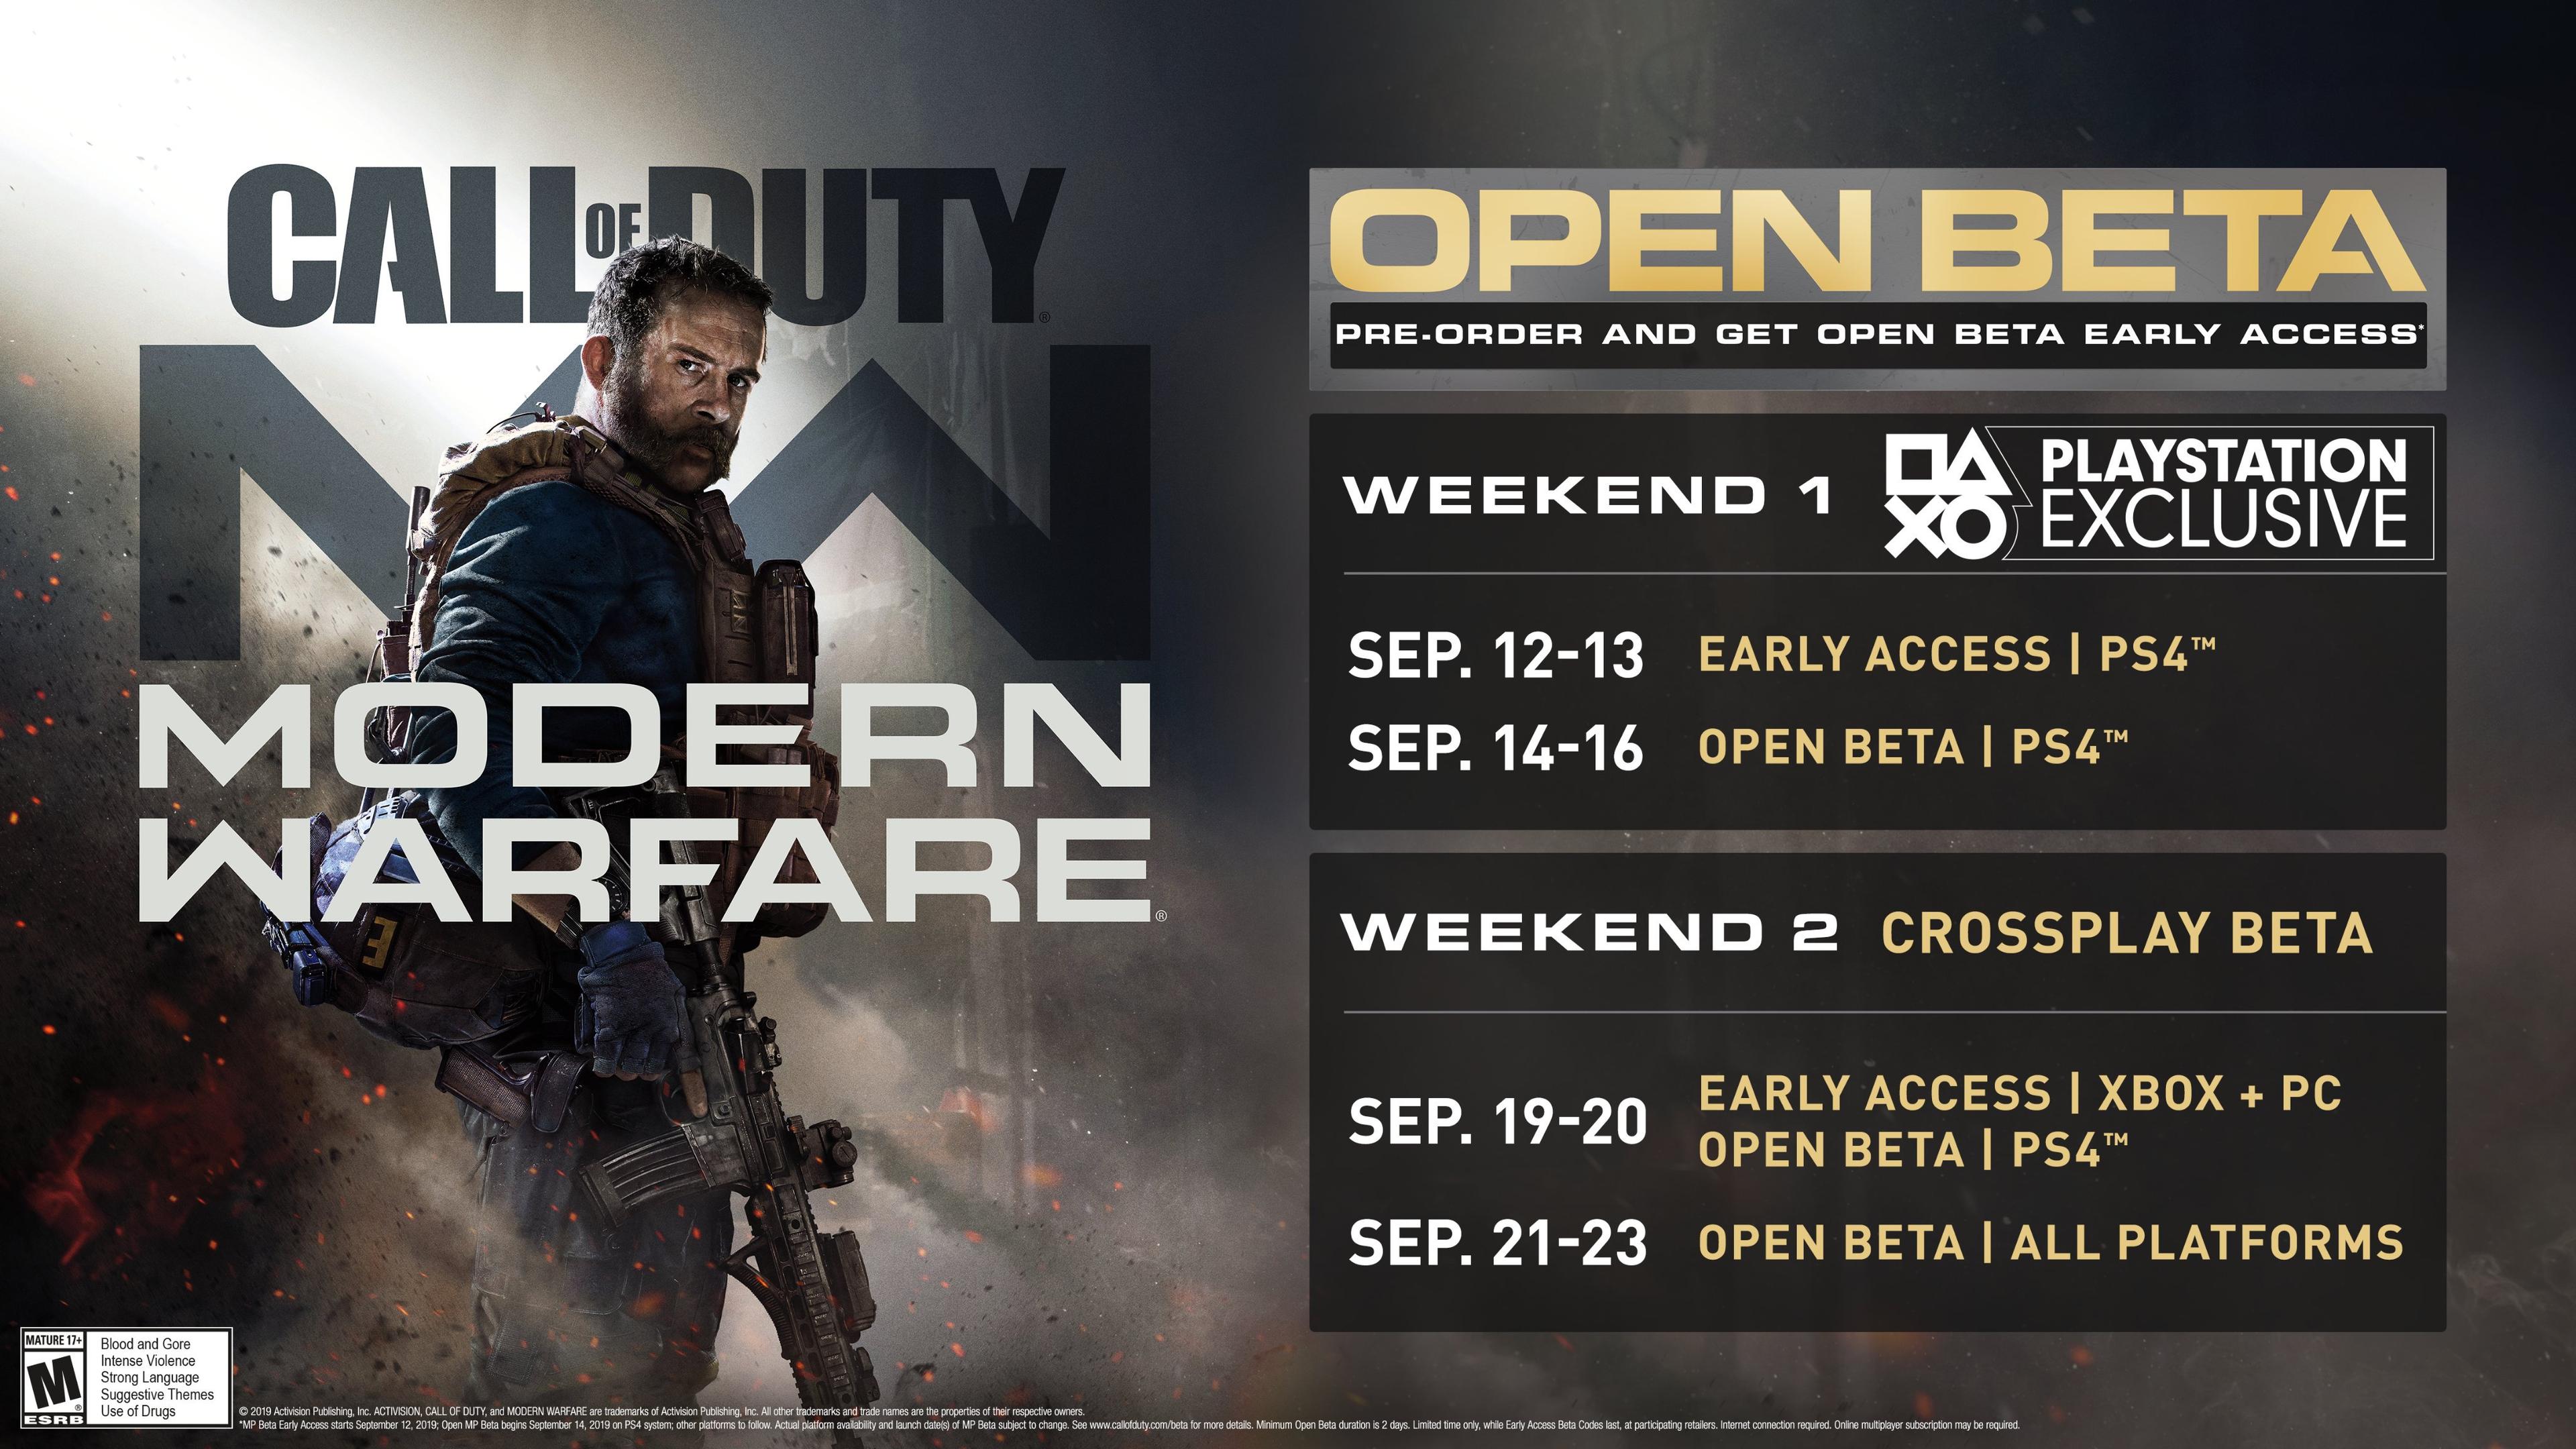 Pre-Download Call of Duty: Advanced Warfare Starting TODAY on Xbox One -  Charlie INTEL